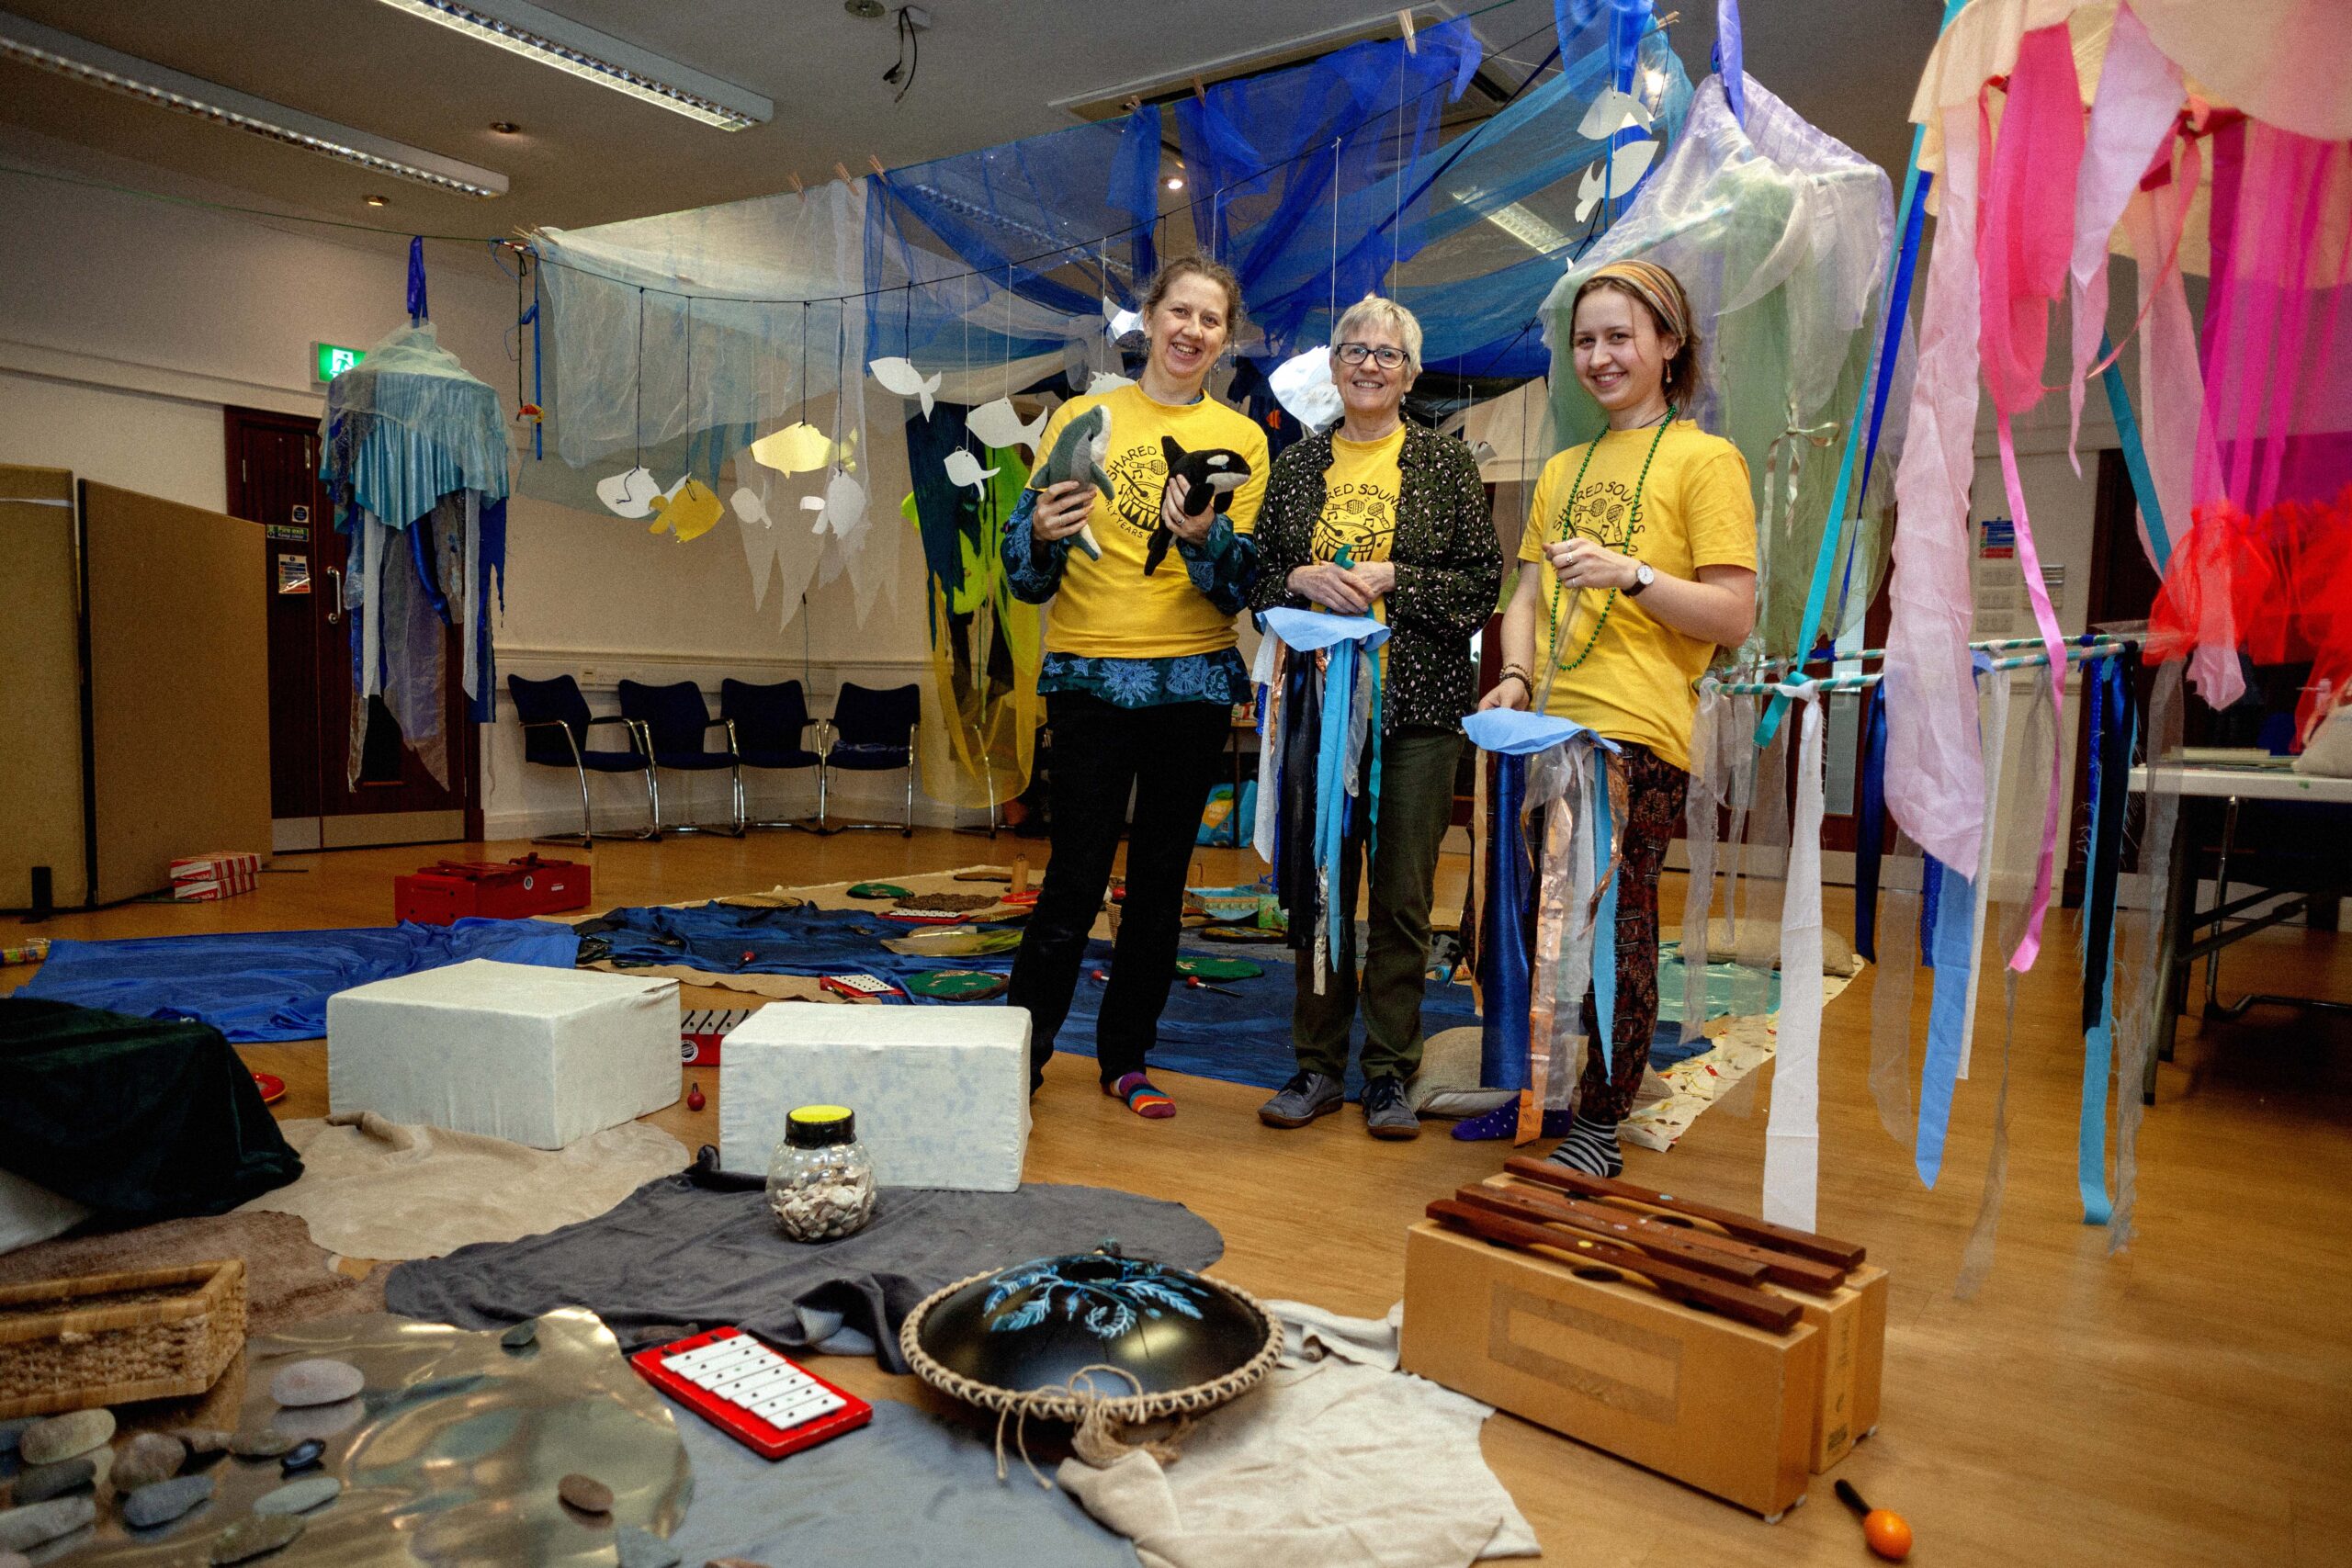 Some of the Early Years team surrounded by their immersive underwater world for the first 6 week block of 'Story Worlds'!